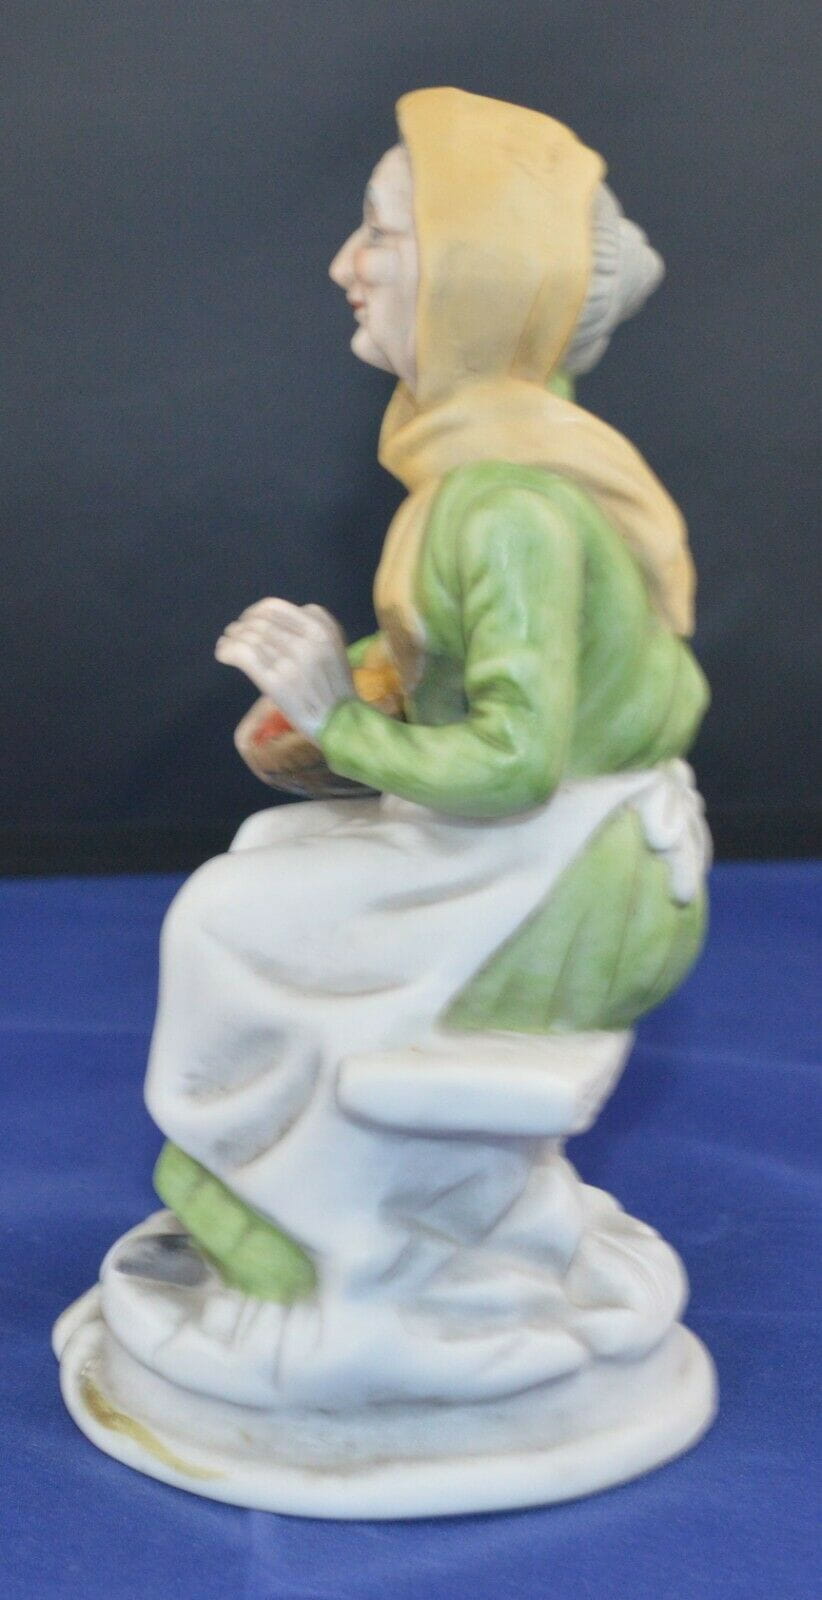 DECORATIVE FIGURINE LADY SITTING WITH A BASKET OF VEG(PREVIOUSLY OWNED)GOOD CONDITION - TMD167207